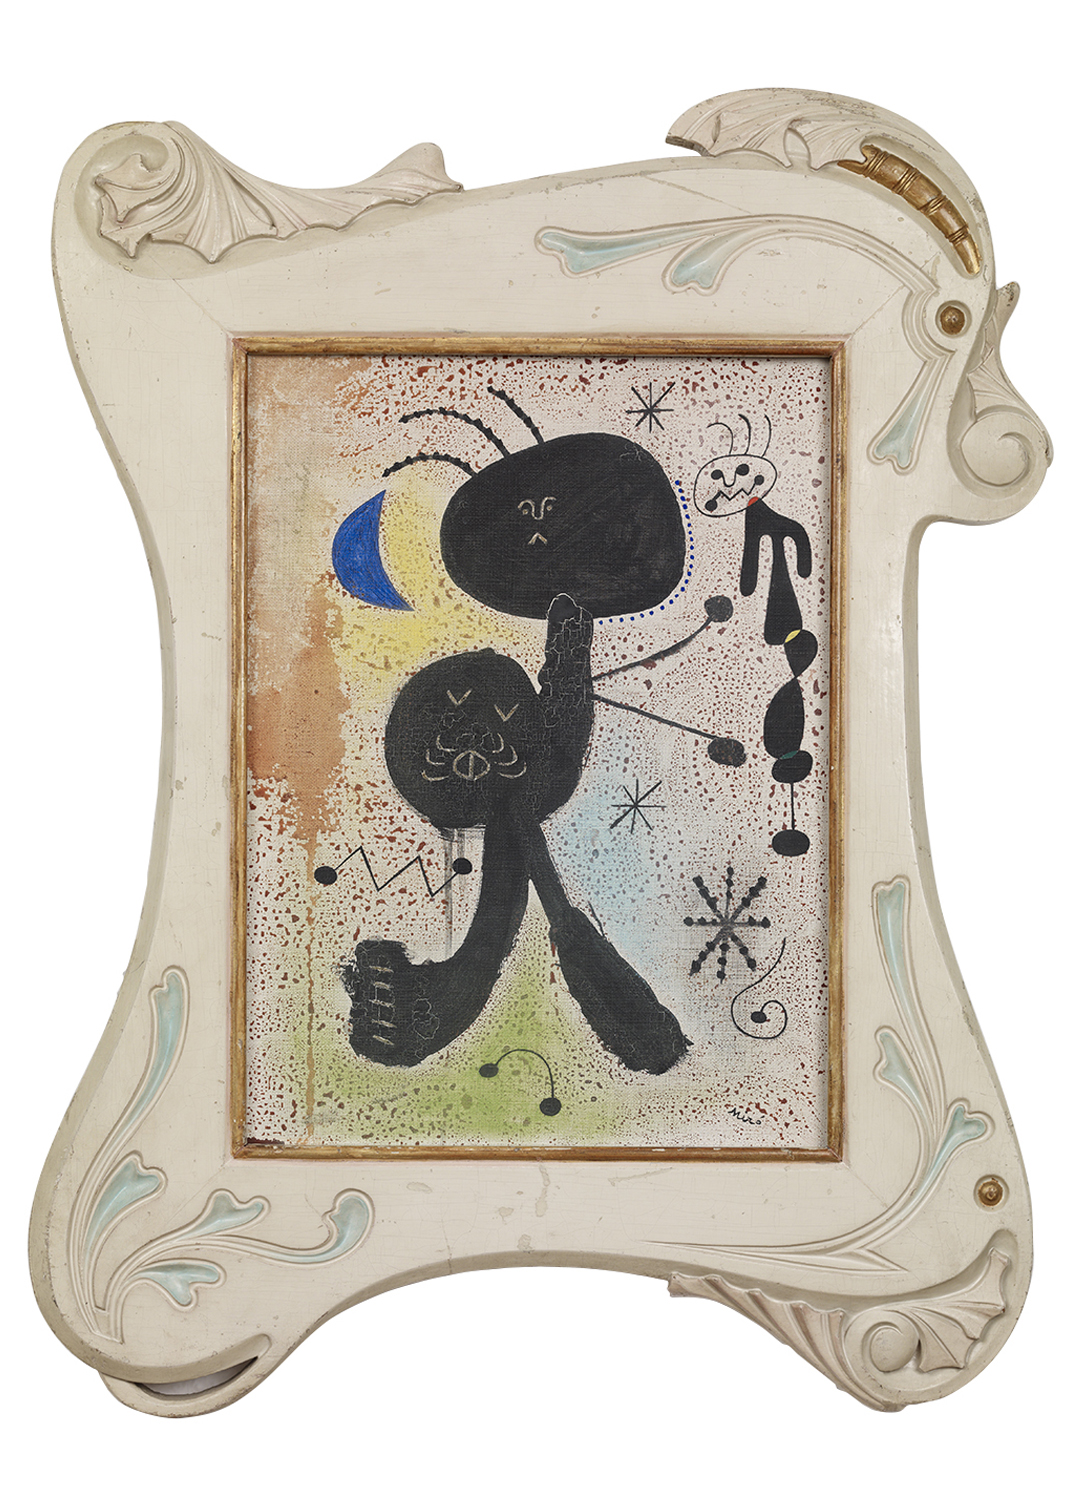 The Poetry of Everyday Life: Hong Kong Museum of Art showcases works of  Spanish modern art master Miró